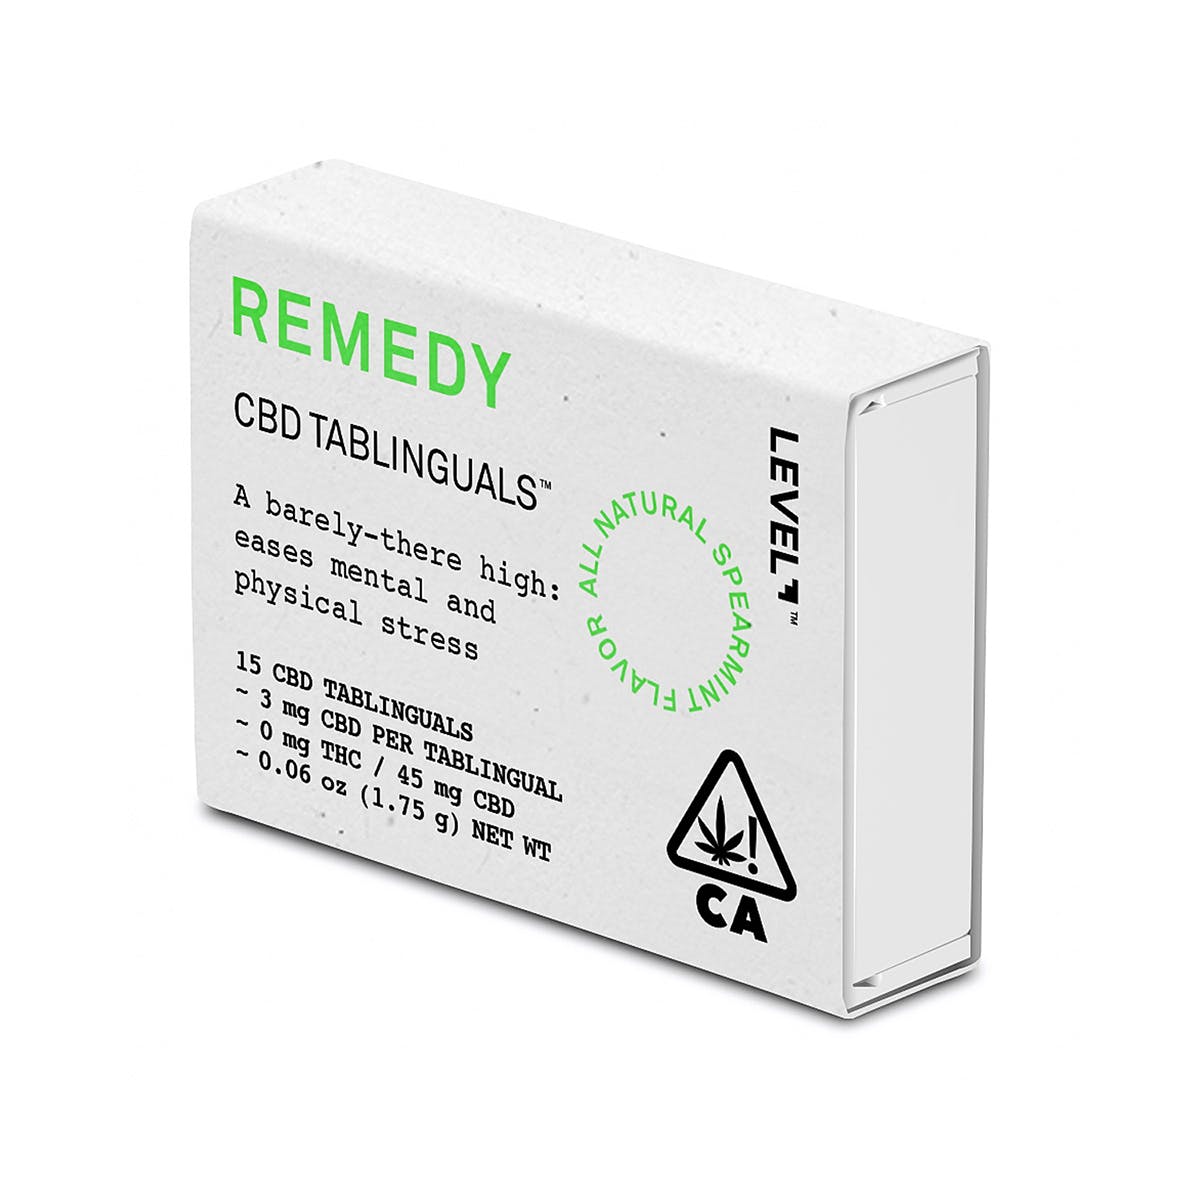 marijuana-dispensaries-los-angeles-patients-a-caregivers-group-lapcg-in-west-hollywood-remedy-tablingual-45mg-cbd